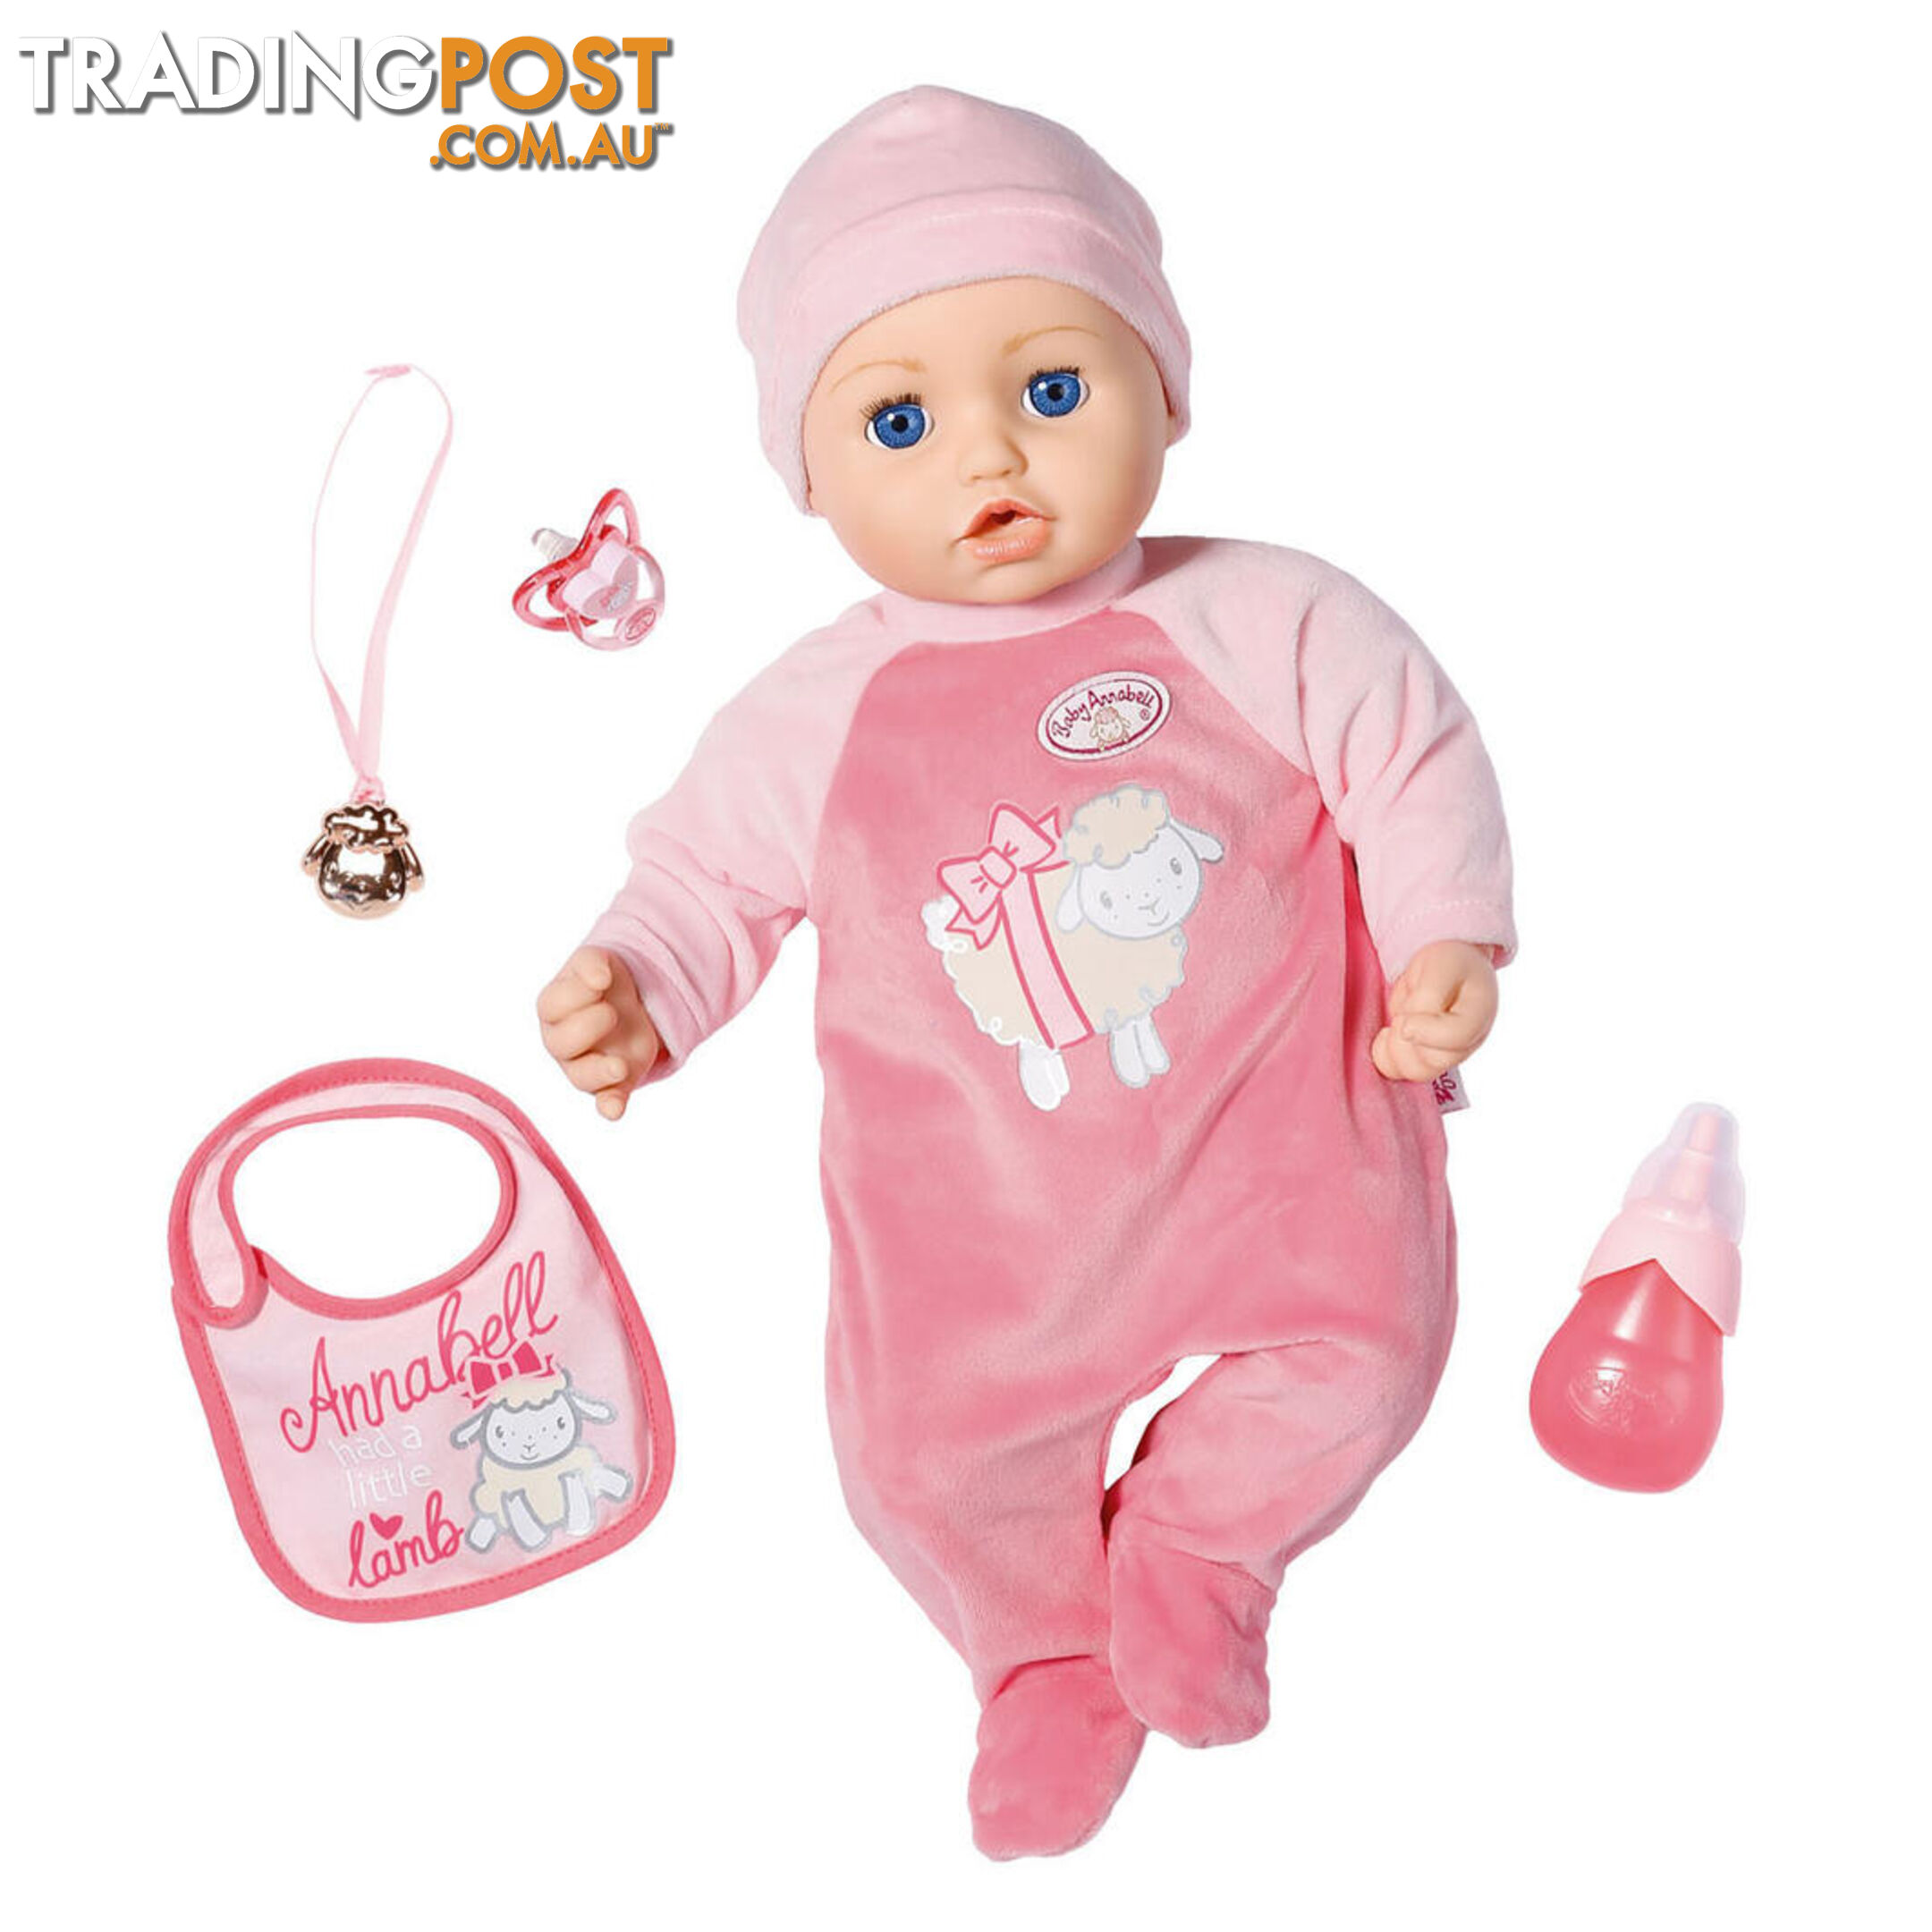 Baby Annabell - 43cm (New Plastic Free Packaging) - Bj706299 - 4001167706299